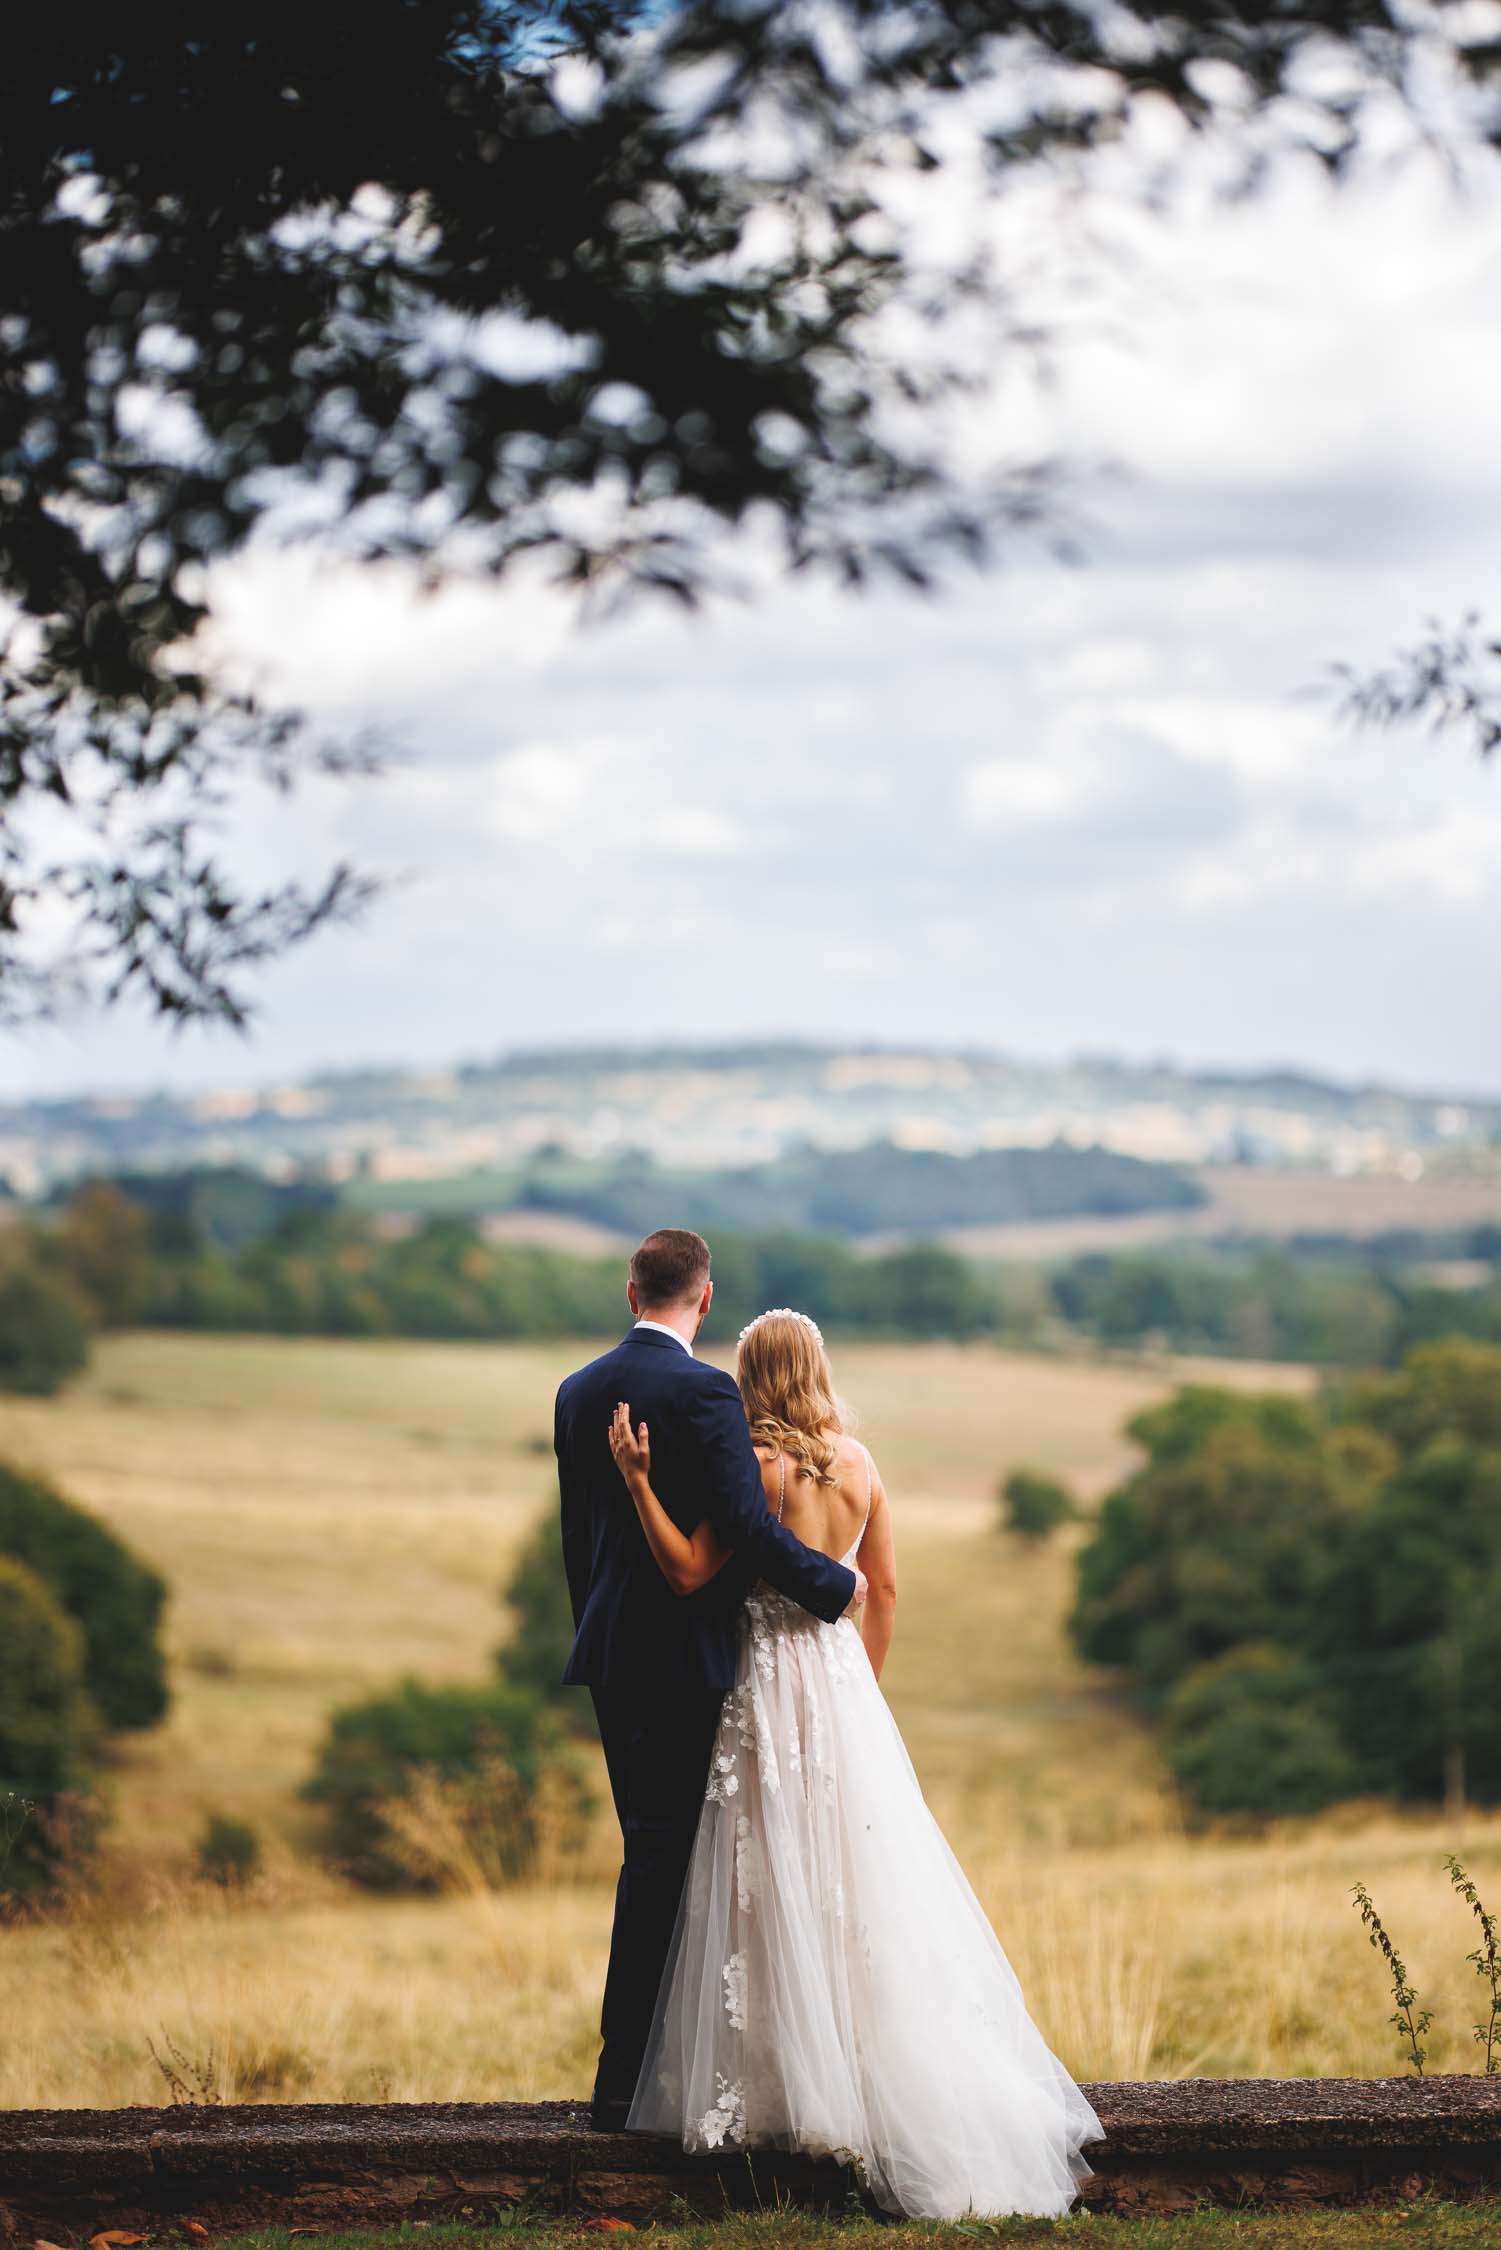 The Bride and groom hug while they enjoy the view at Bredenbury Court Barns in Herefordshire.